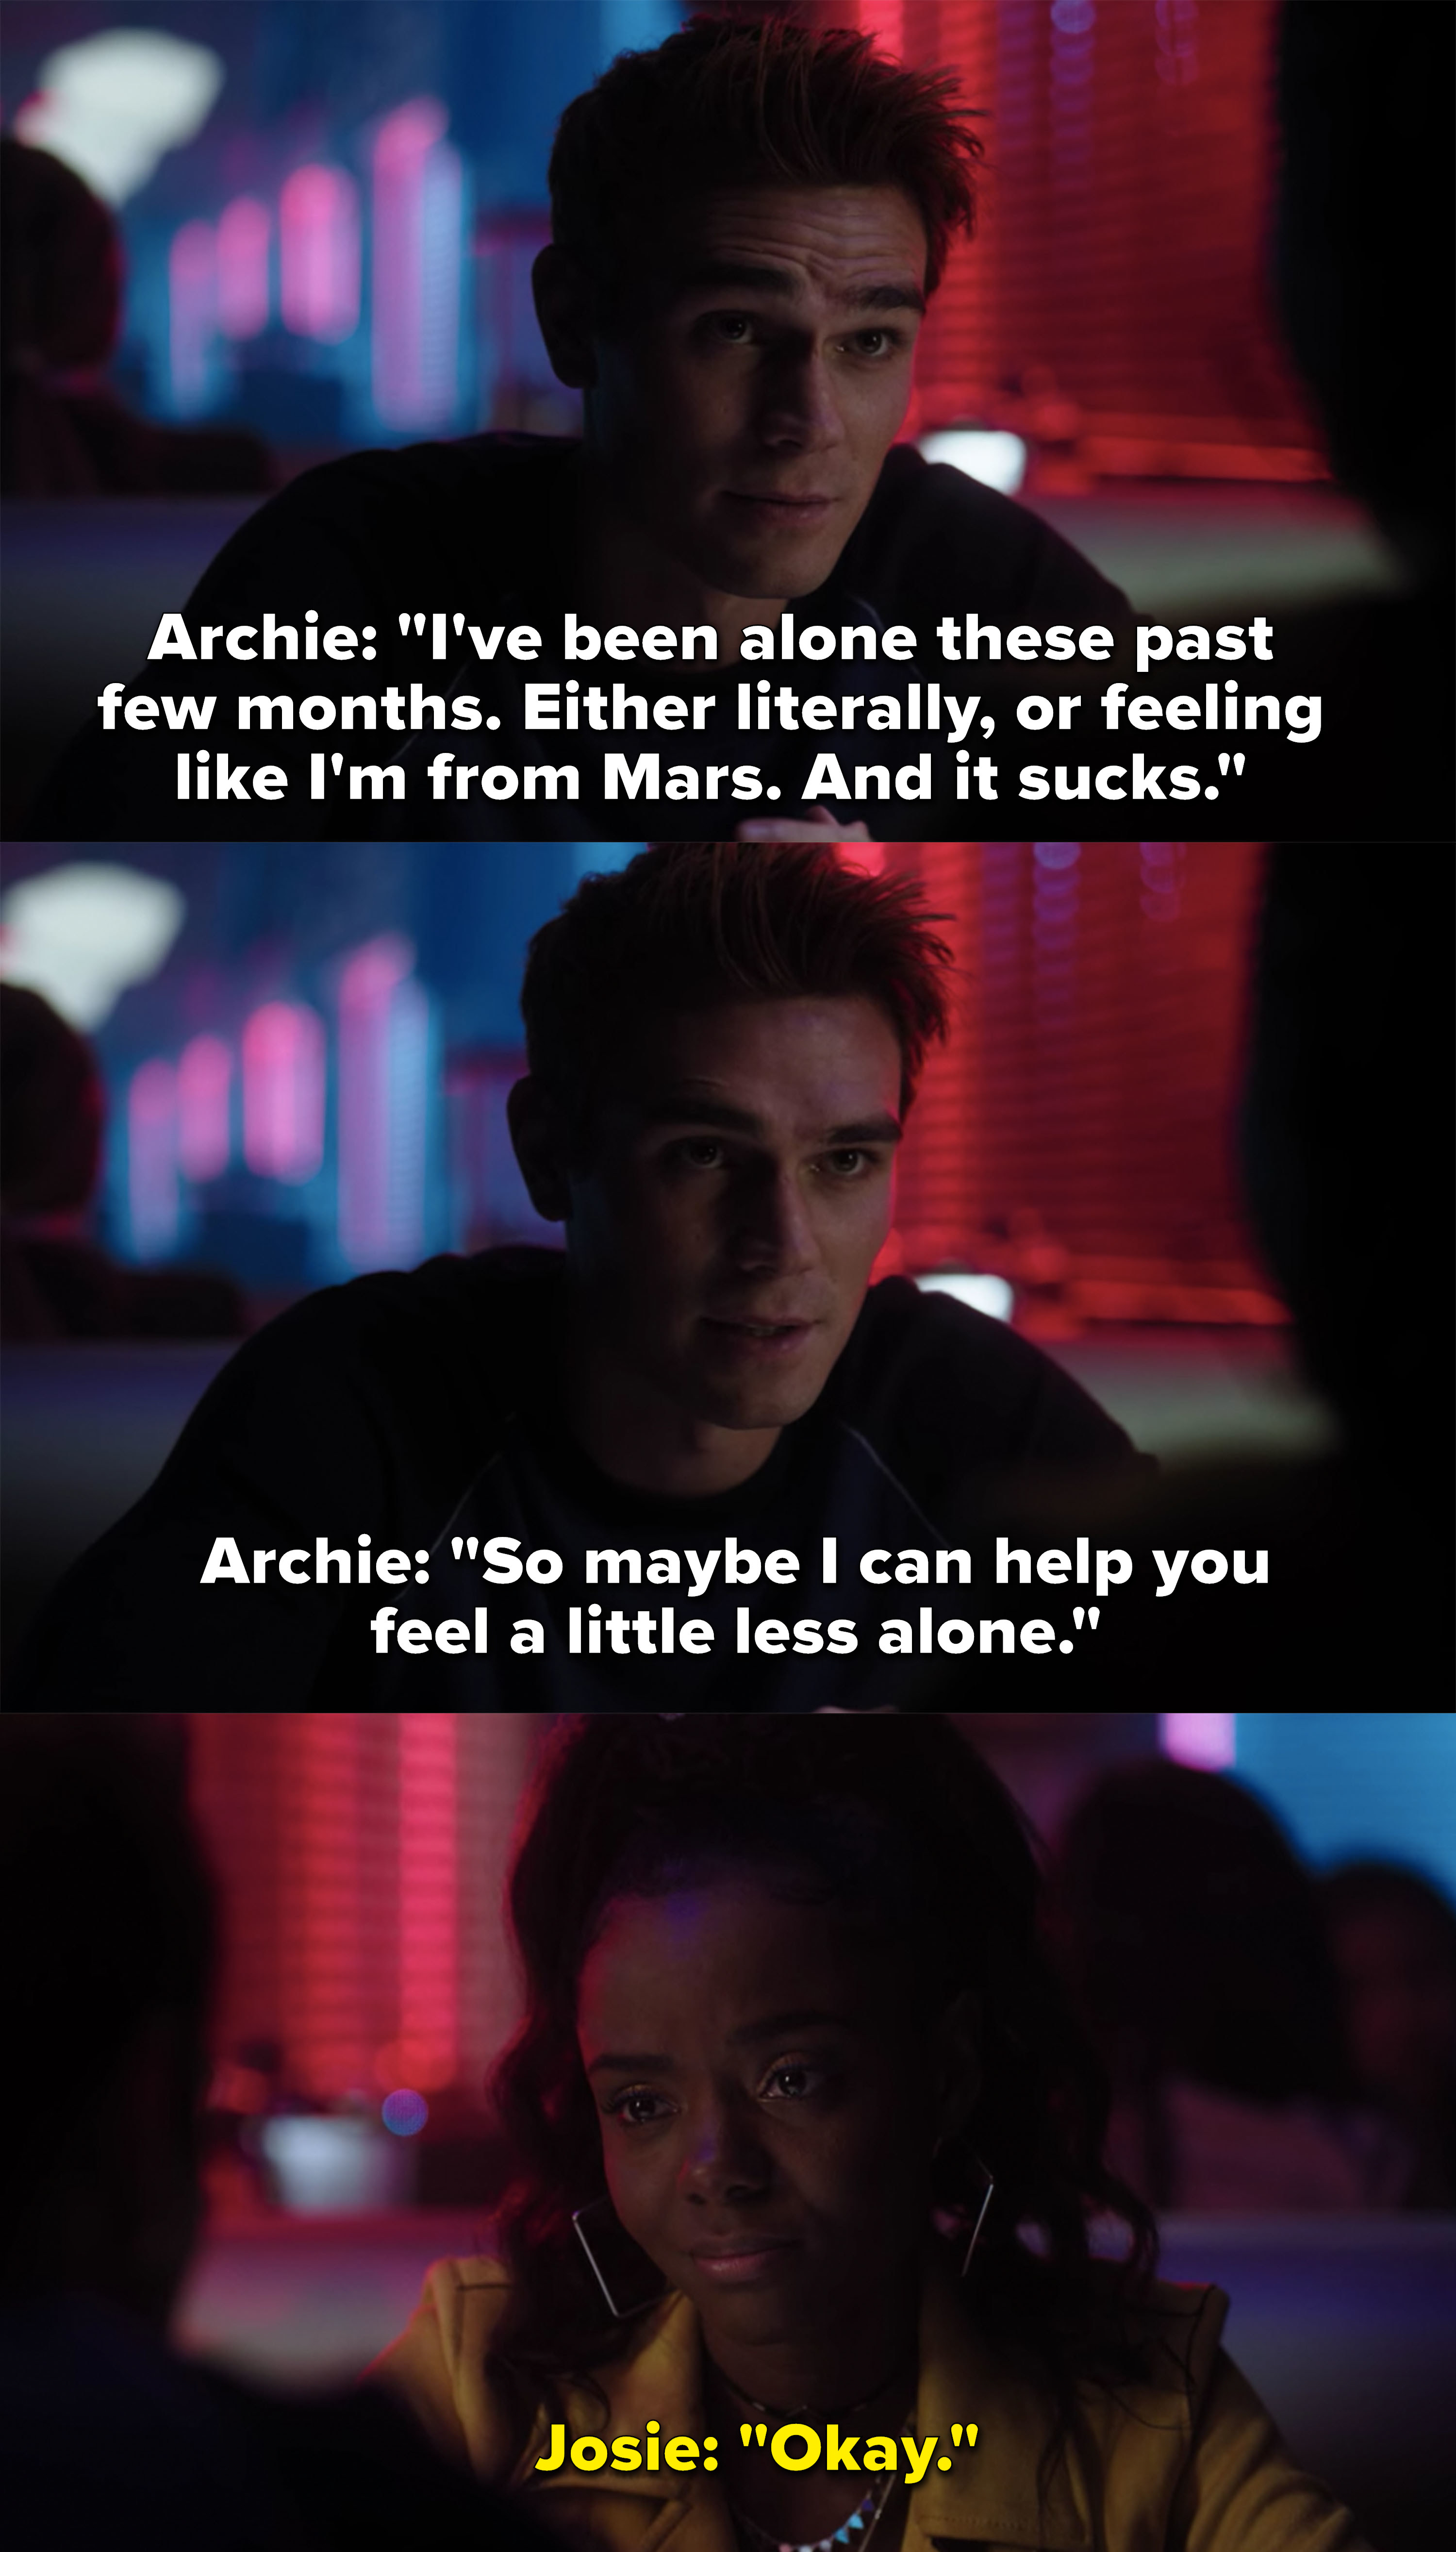 Archie to Josie: &quot;So maybe I can help you feel a little less alone&quot;